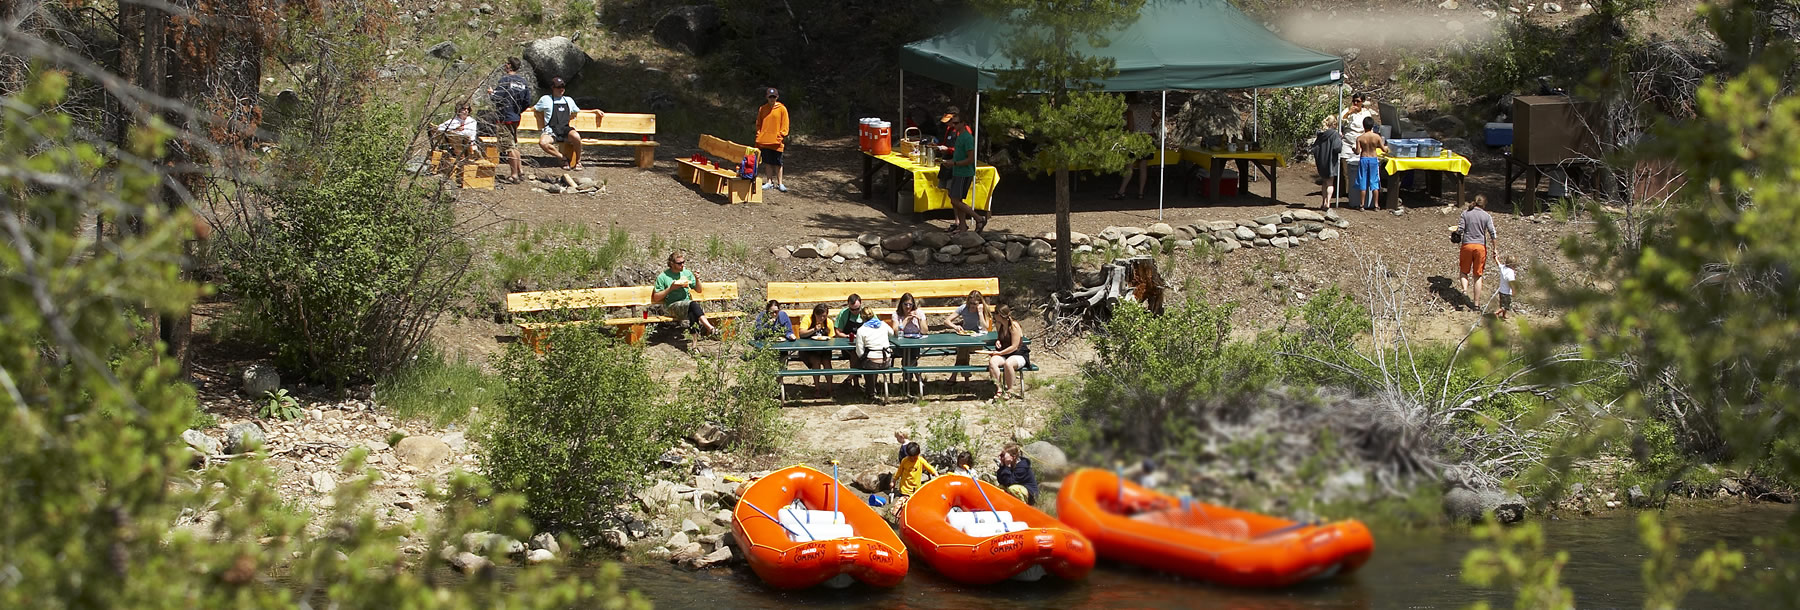 Idaho Rafting, Stanley and Sun Valley